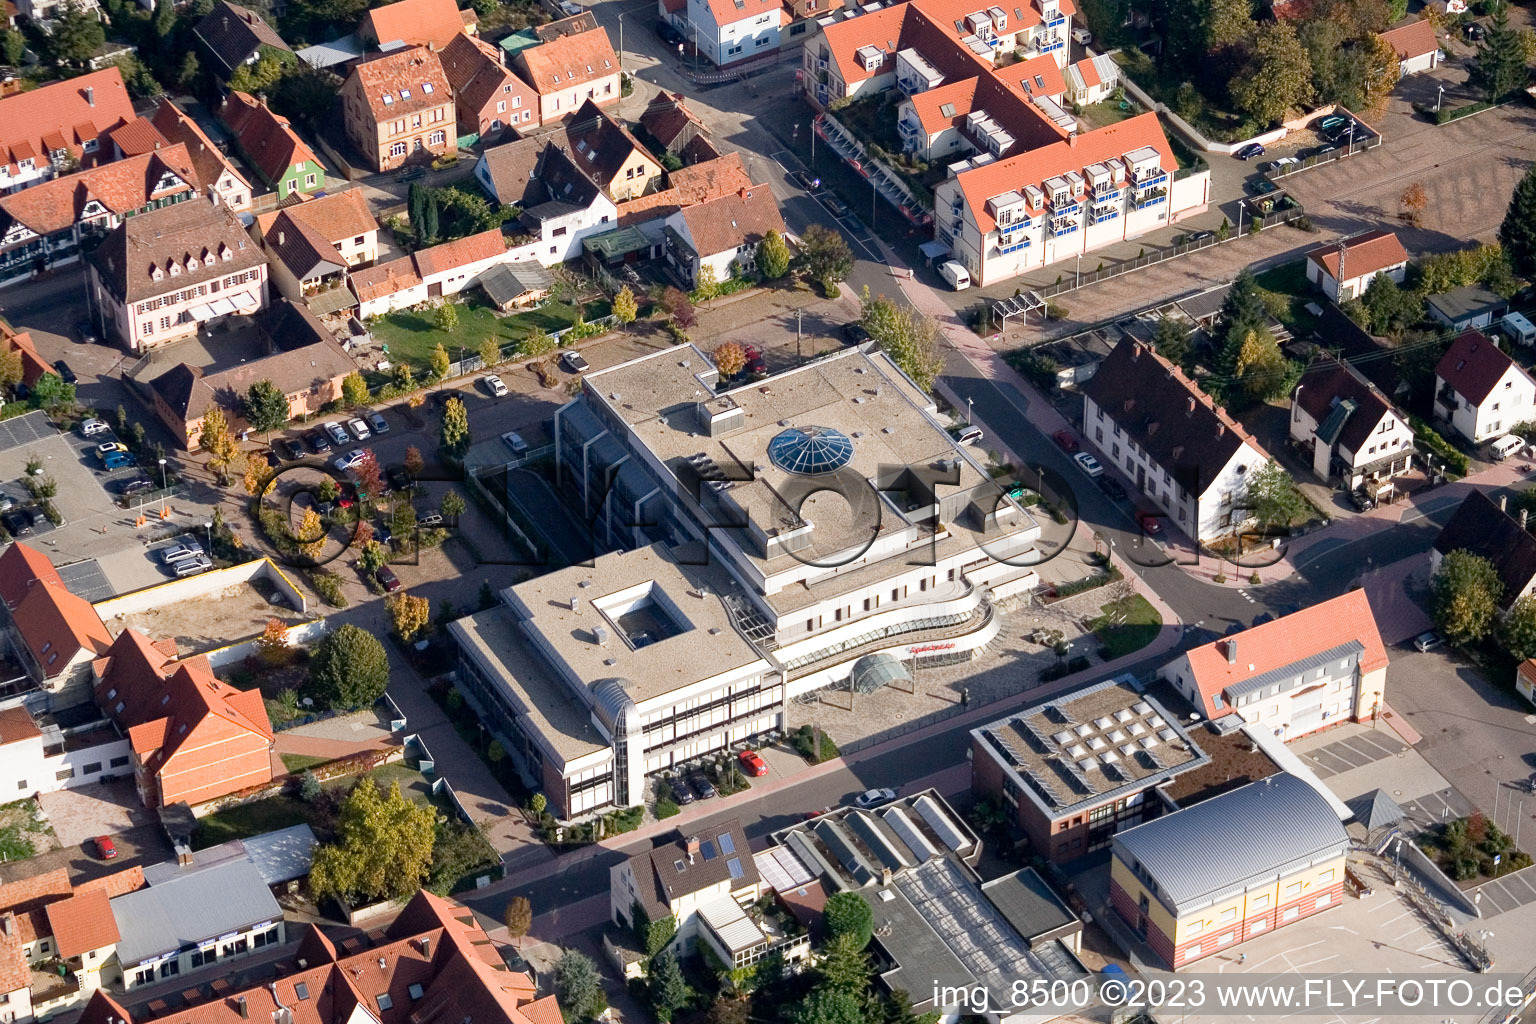 Savings Bank in Kandel in the state Rhineland-Palatinate, Germany seen from above